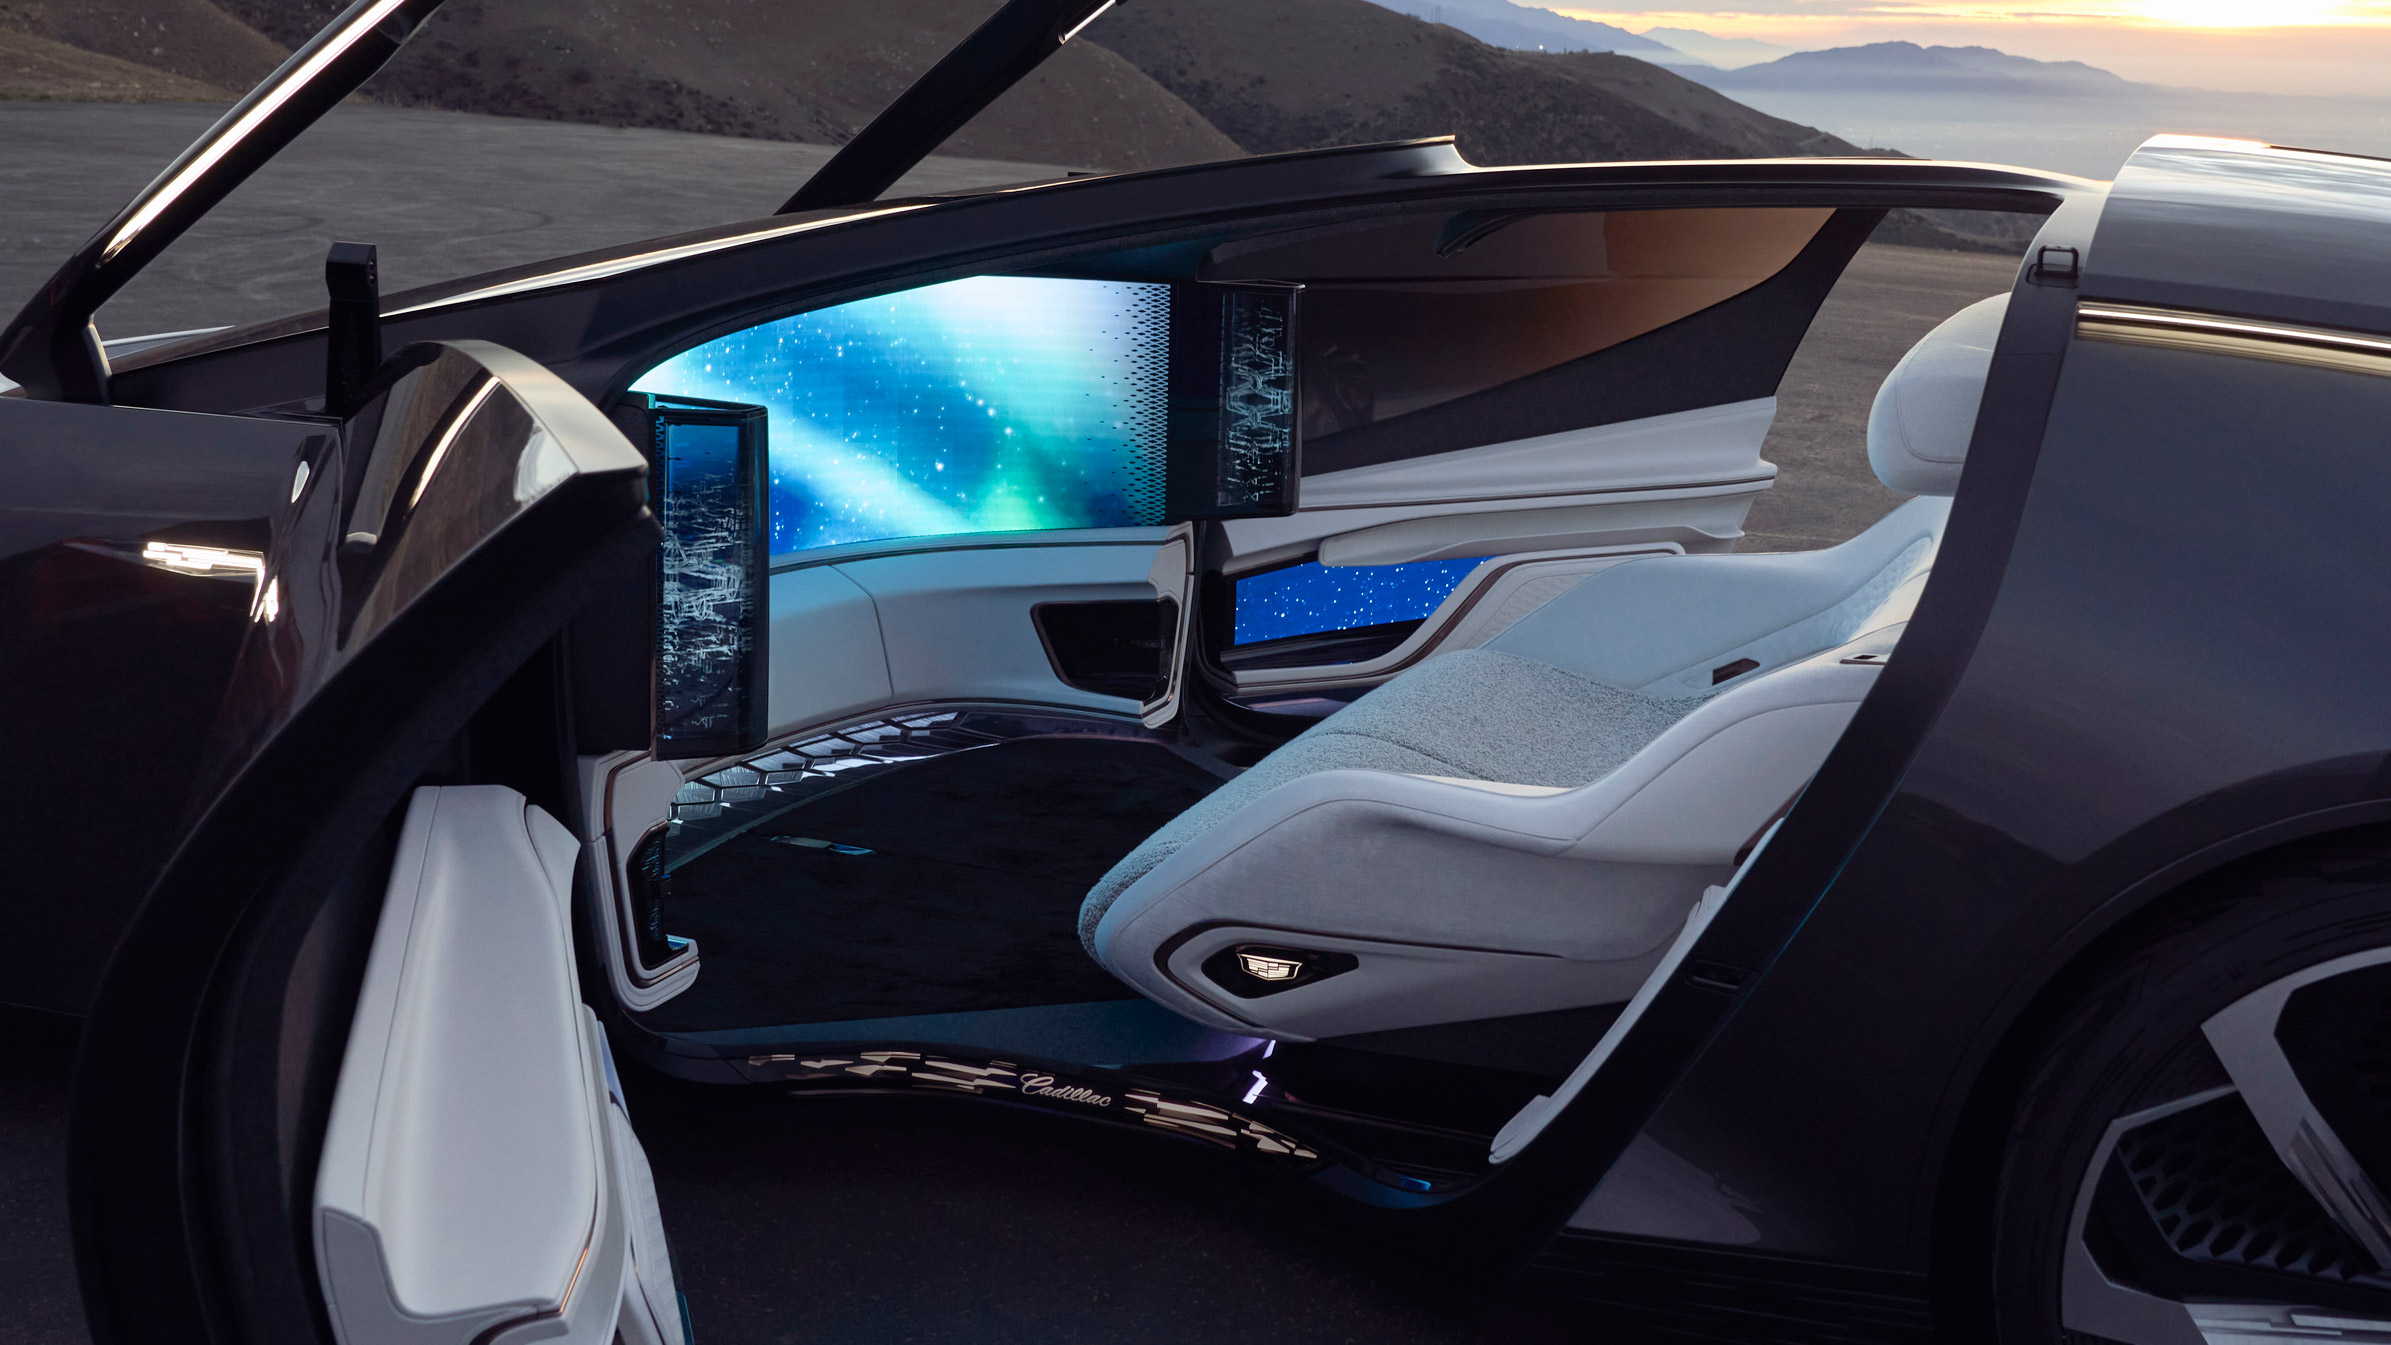 View inside the Cadillac InnerSpace concept